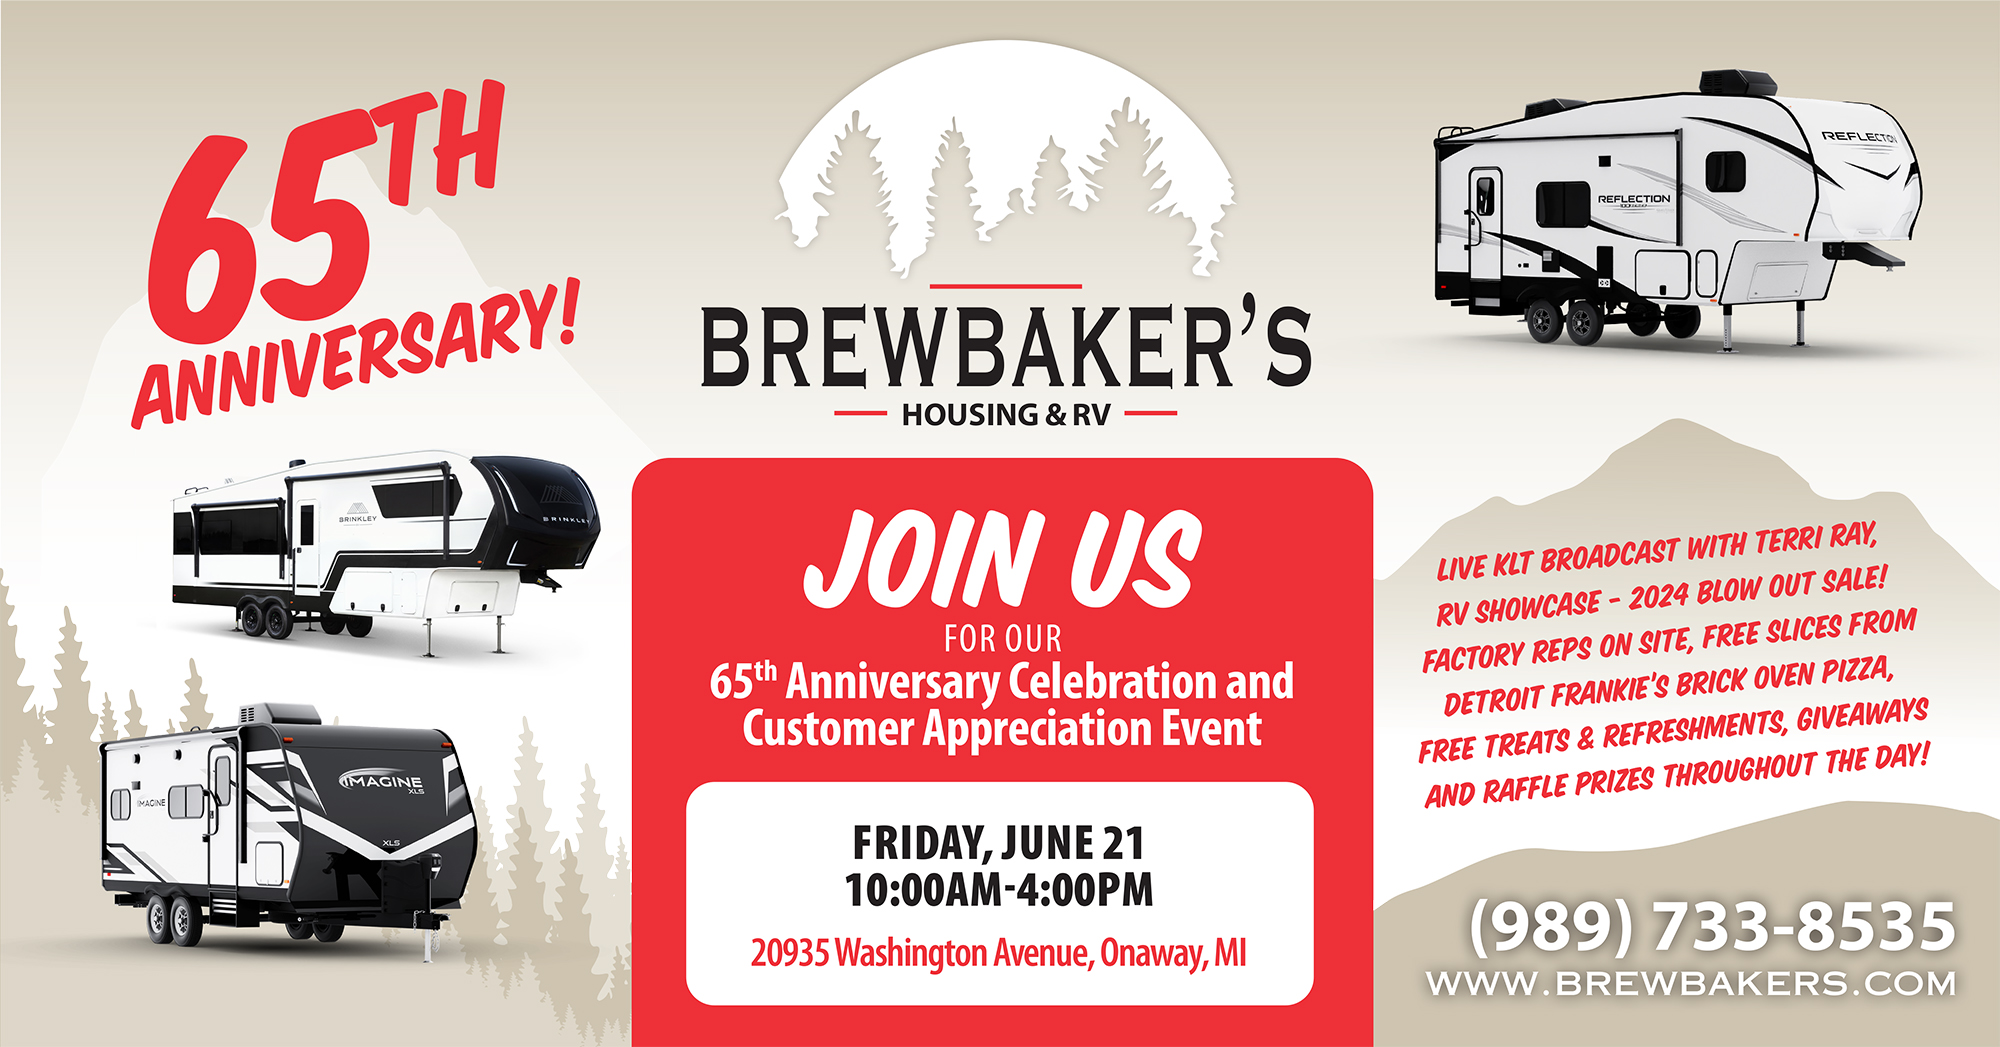 Join us for our 65th aniversary celebration and customer appreciation event. Fri, Jun 21 10am-4pm. 20935 Washington Ave, Onaway, MI. Live KLT Broadcast with Terri Ray, RV Showcase - 2024 Blowout sale! Factory Reps on site, Free slices from detroit frankie's brick oven pizza, free treats & refreshments, giveaways, and raffle prices throughout the day.